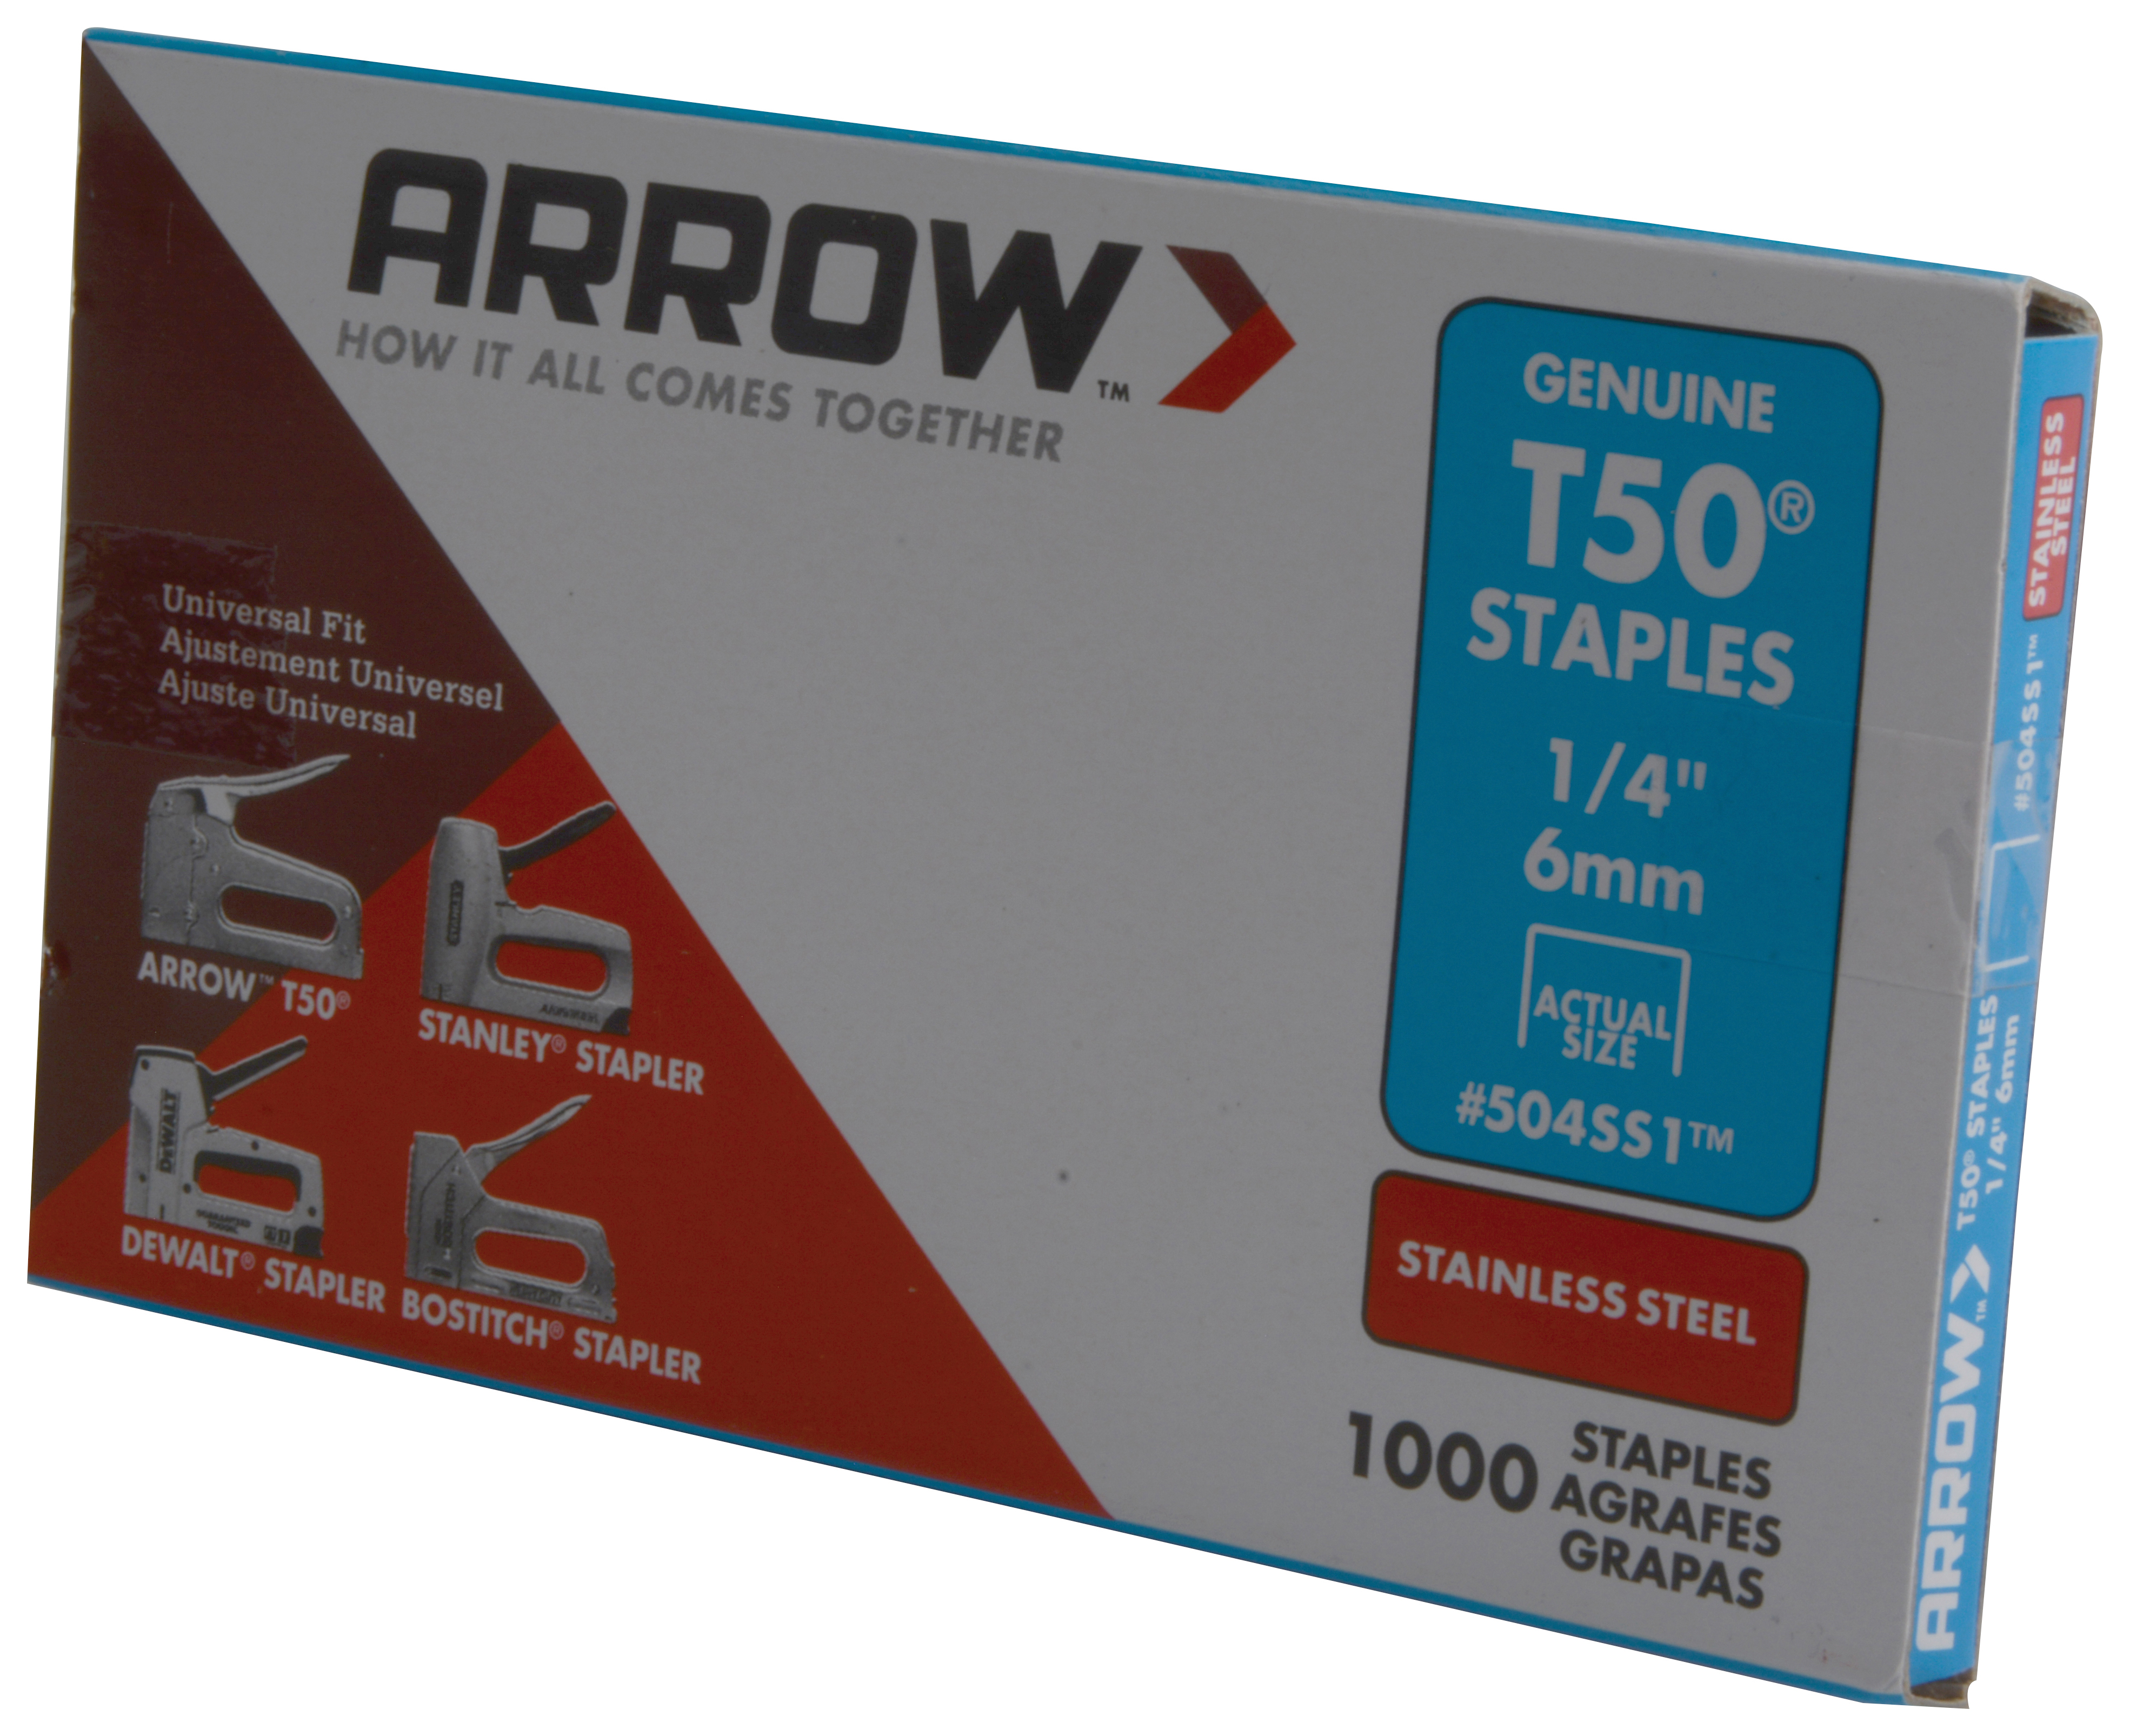 Arrow T50 Staples 6mm (1/4in) - Pack of 5000